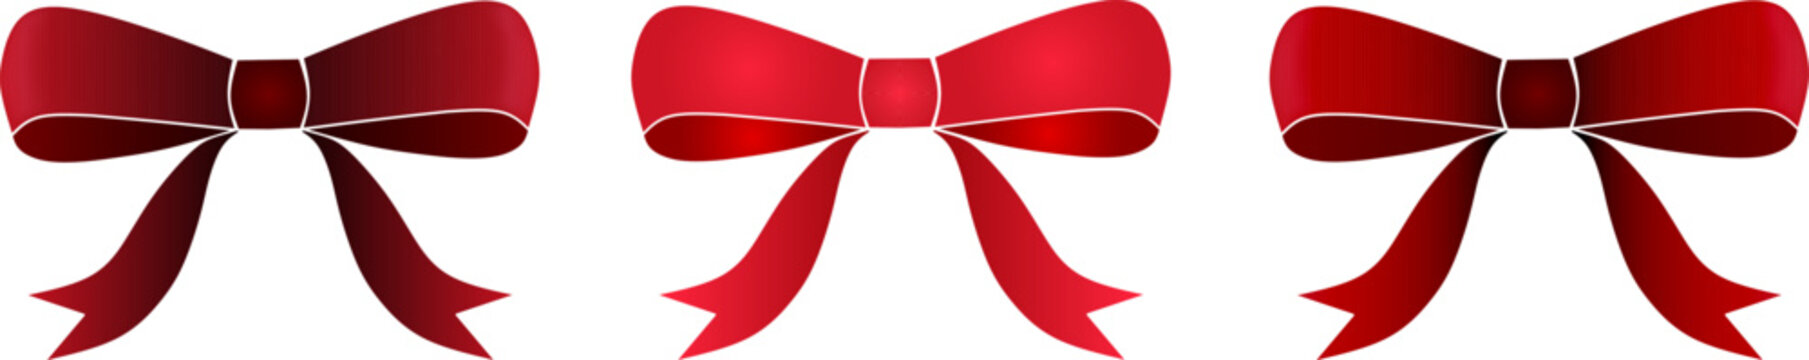 Set of three red bows to decorate a wedding card, gift card or website. EPS10 vector without background.